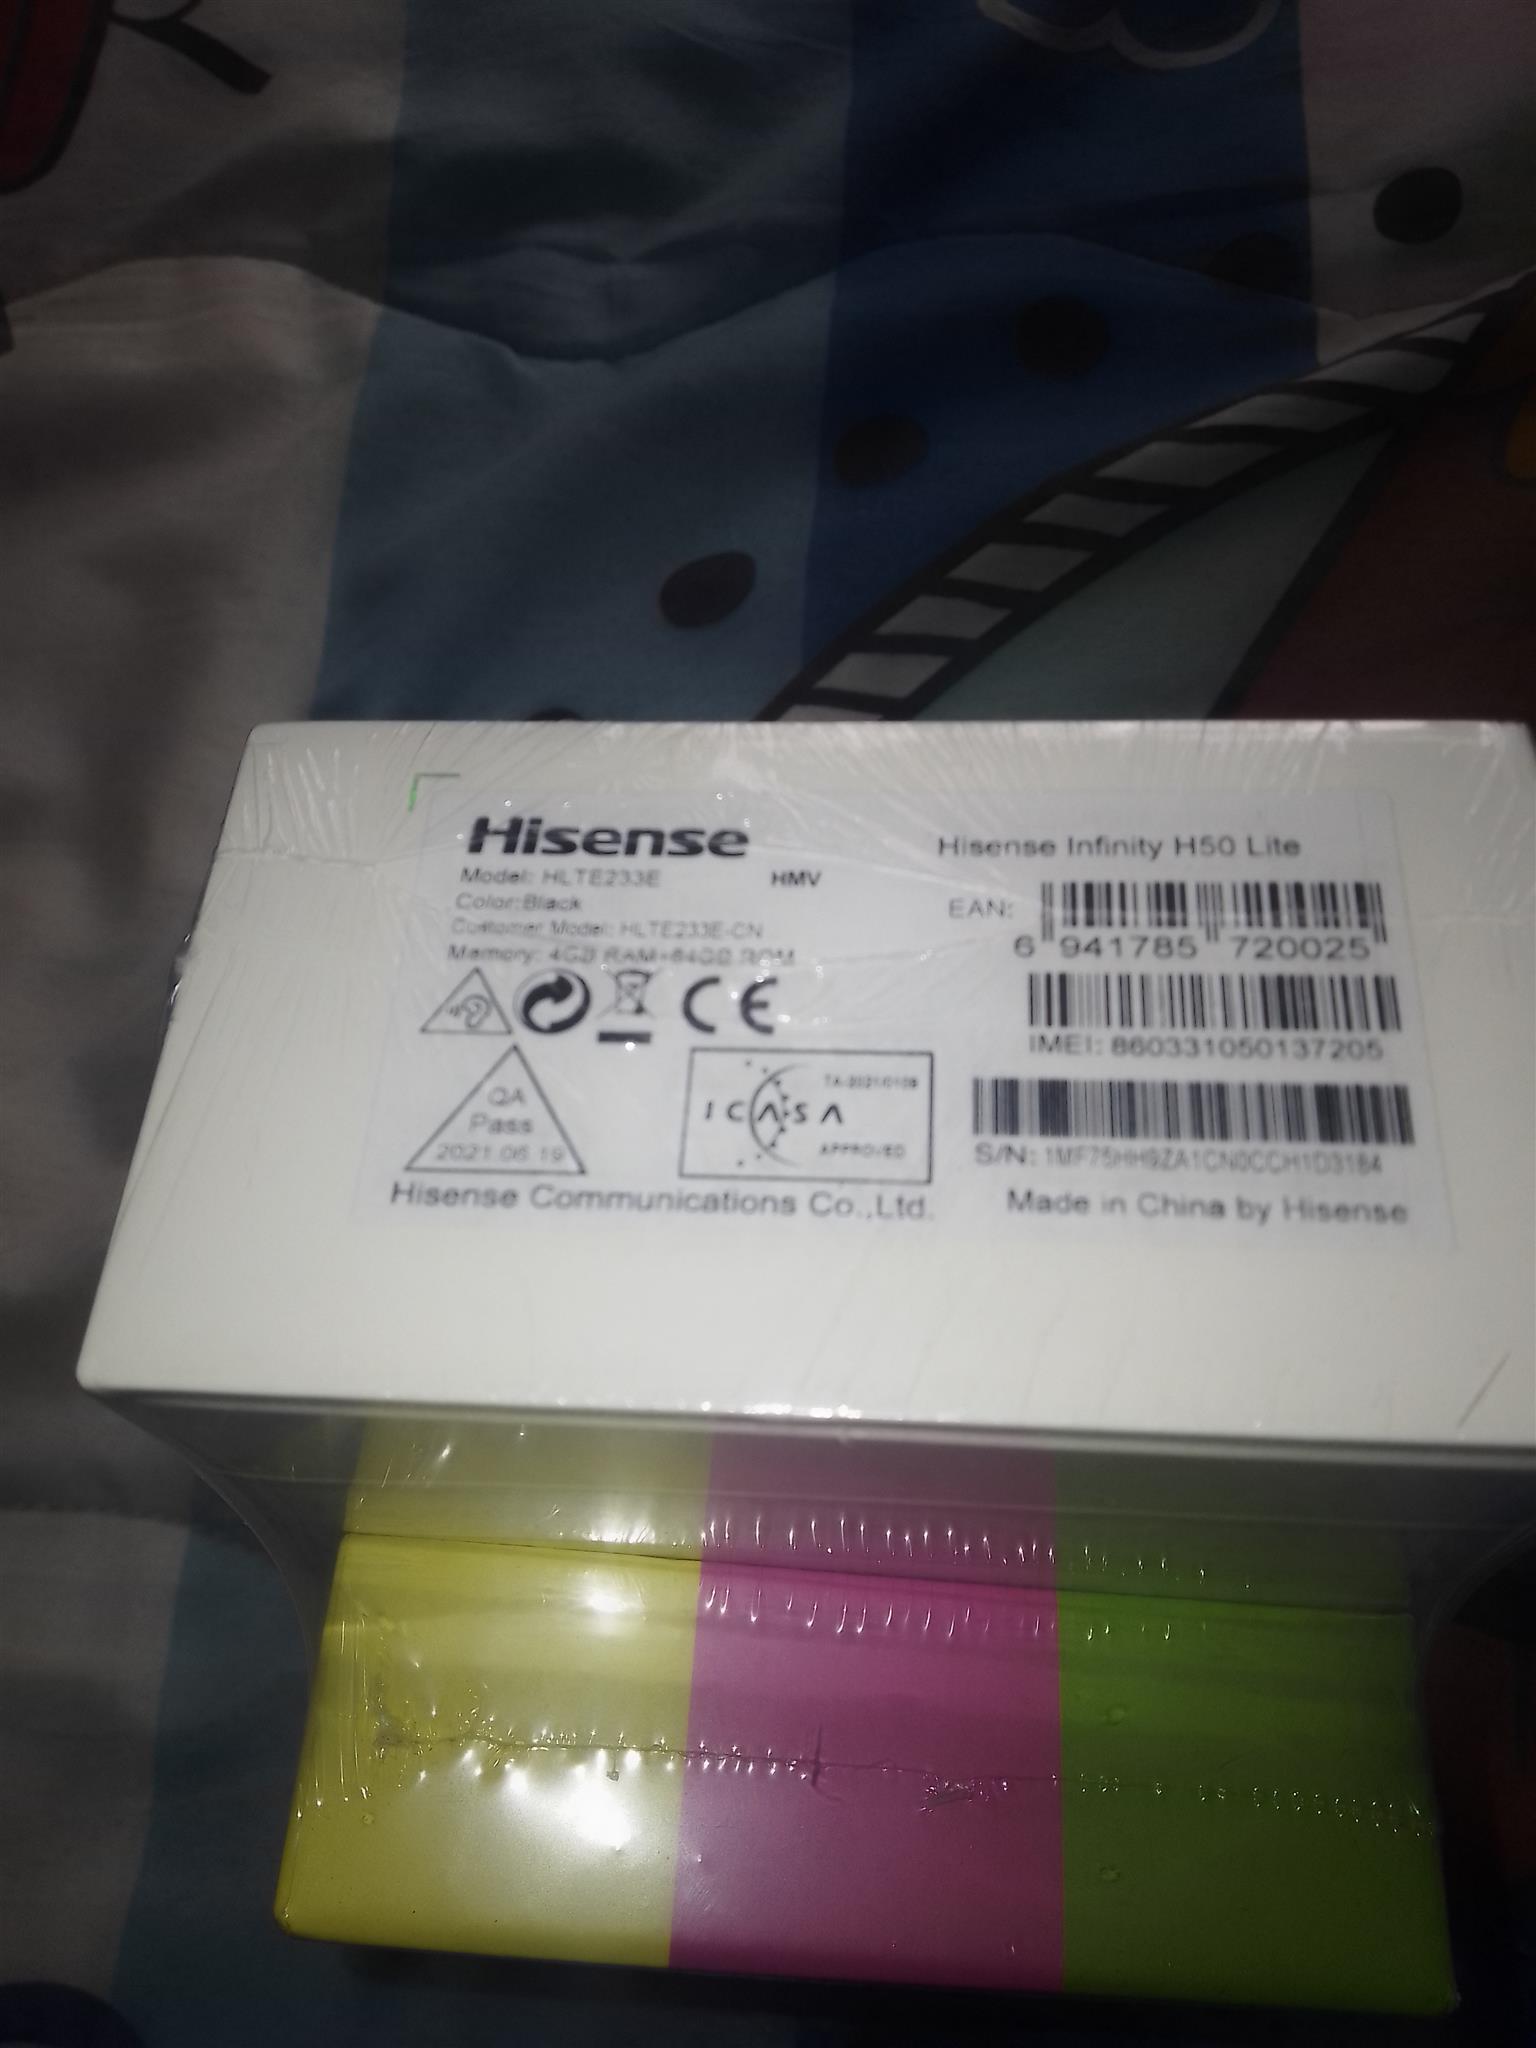 I have a Hisense H50 Infinity Lite cell phone for sale.